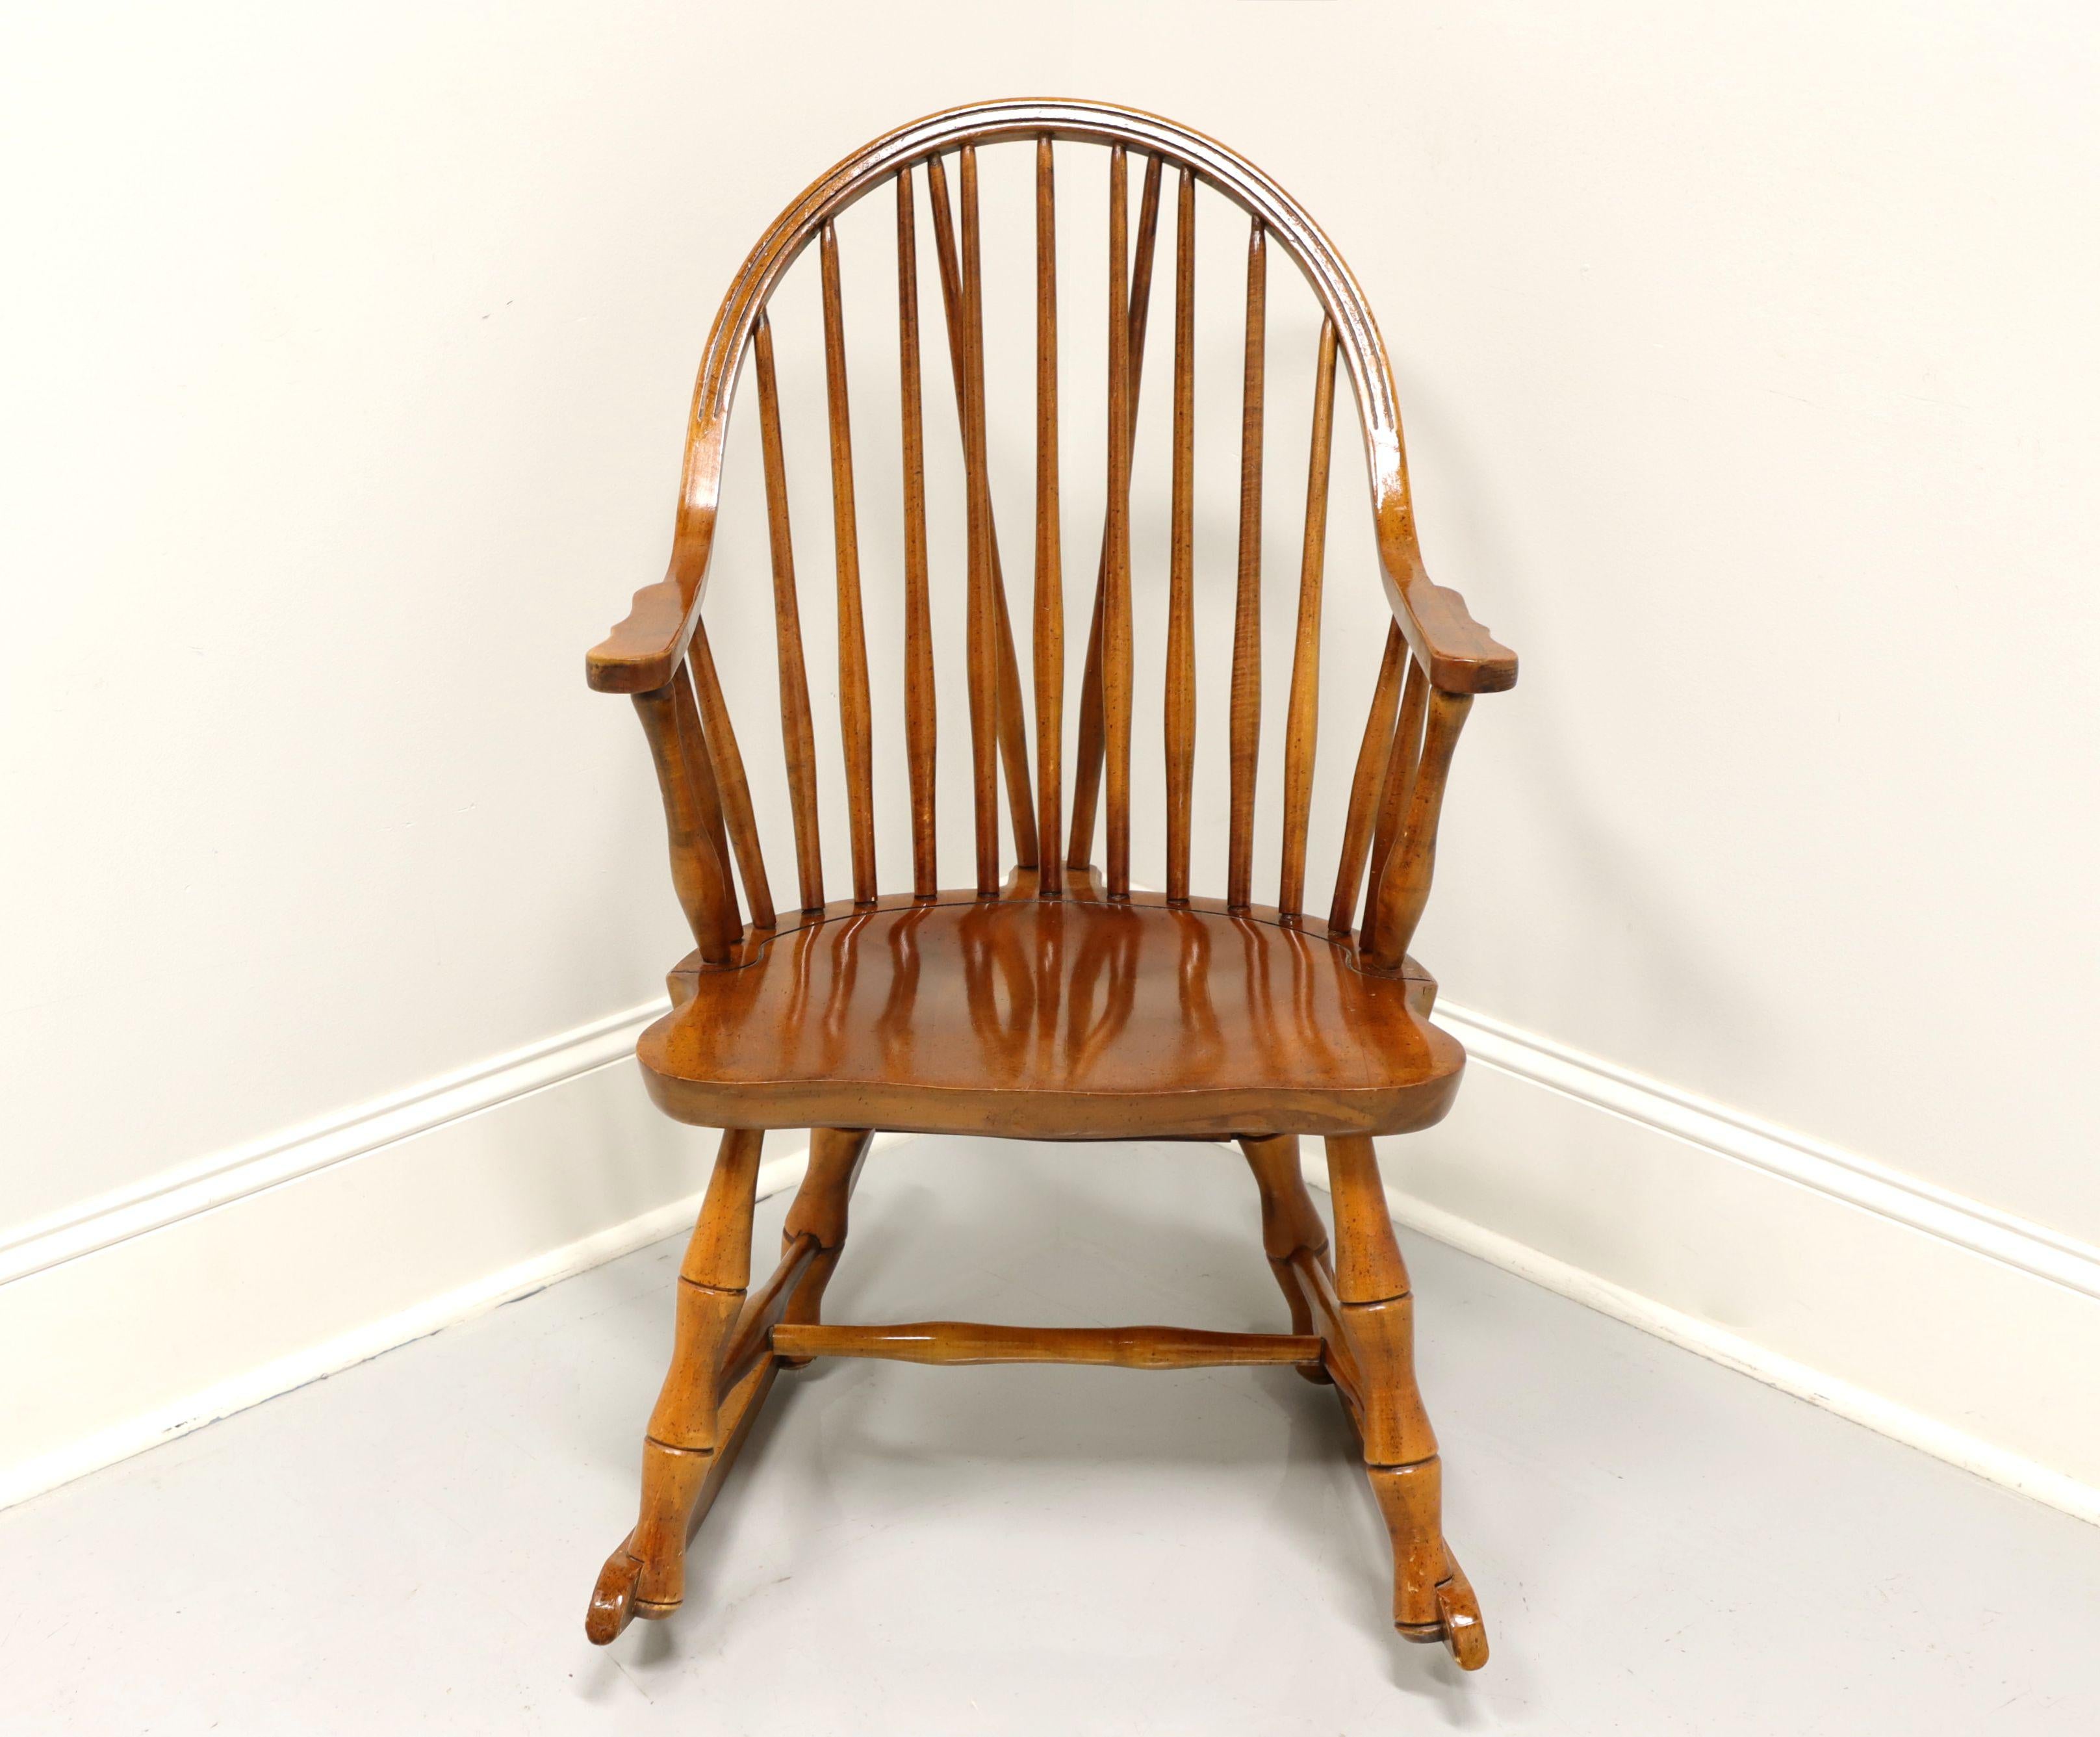 A vintage Windsor style rocking chair by Viriginia House. Solid maple with bowback, turned spindles, turned legs, stretchers and rockers. Made in Atkins, Virginia, USA, in the mid 20th Century.

Measures: Overall: 22.75 W 28 D 35 H, Seat: 20 W 16.25